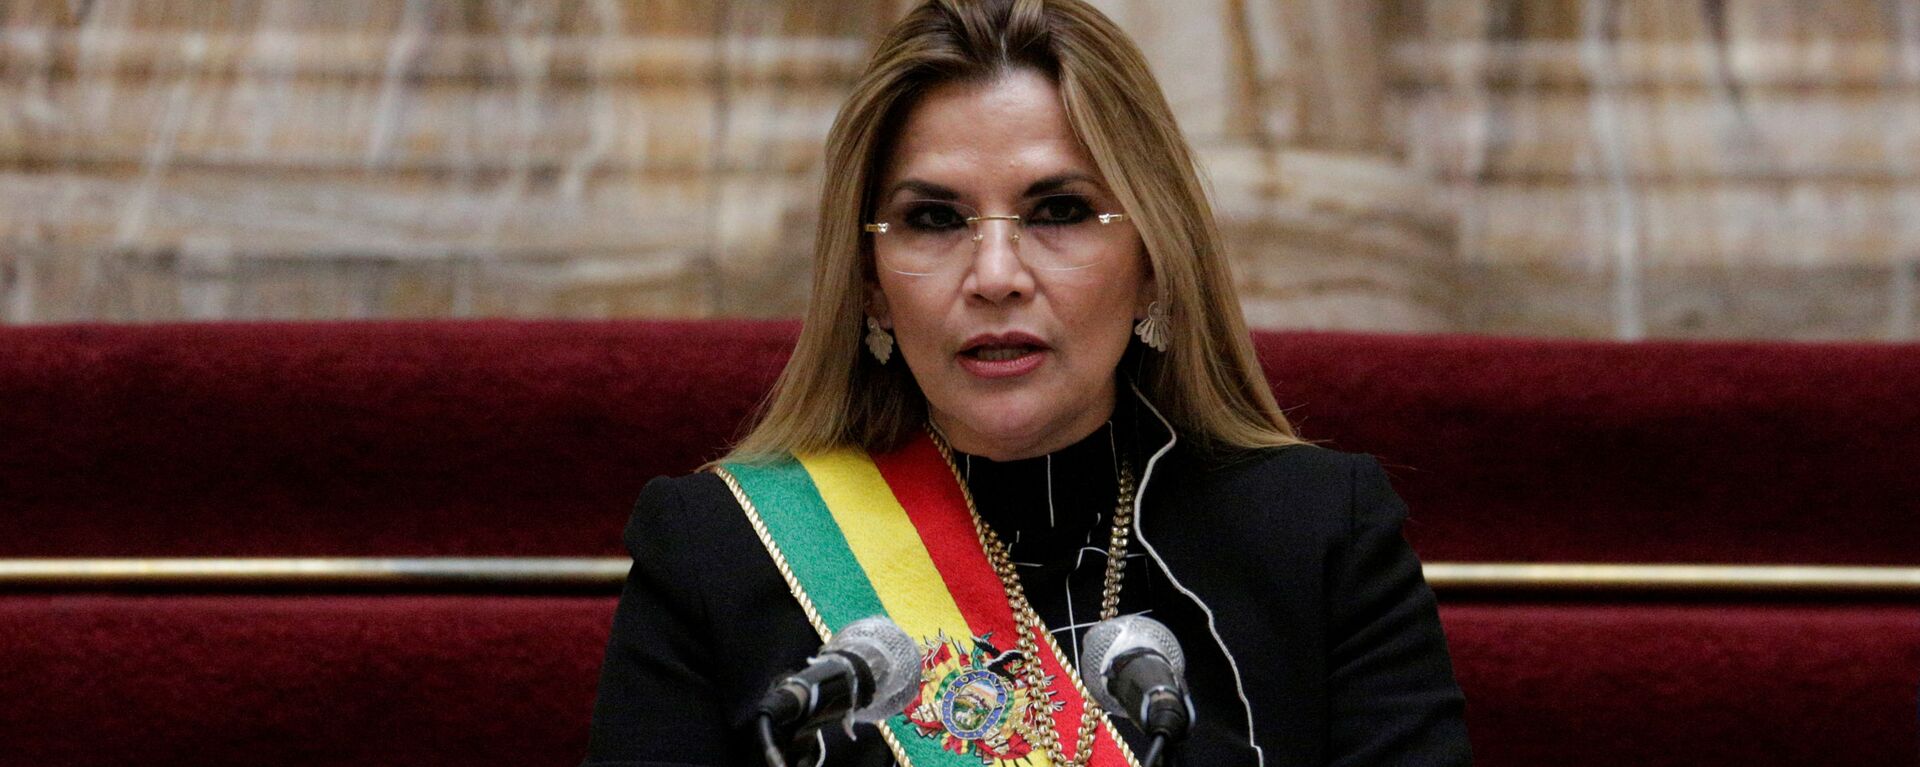 Bolivia's interim President Jeanine Anez speaks during a ceremony marking the 195th anniversary of the Bolivia foundation at the presidential palace, amid the coronavirus disease (COVID-19) outbreak, in La Paz, Bolivia, August 6, 2020. - Sputnik International, 1920, 26.03.2021